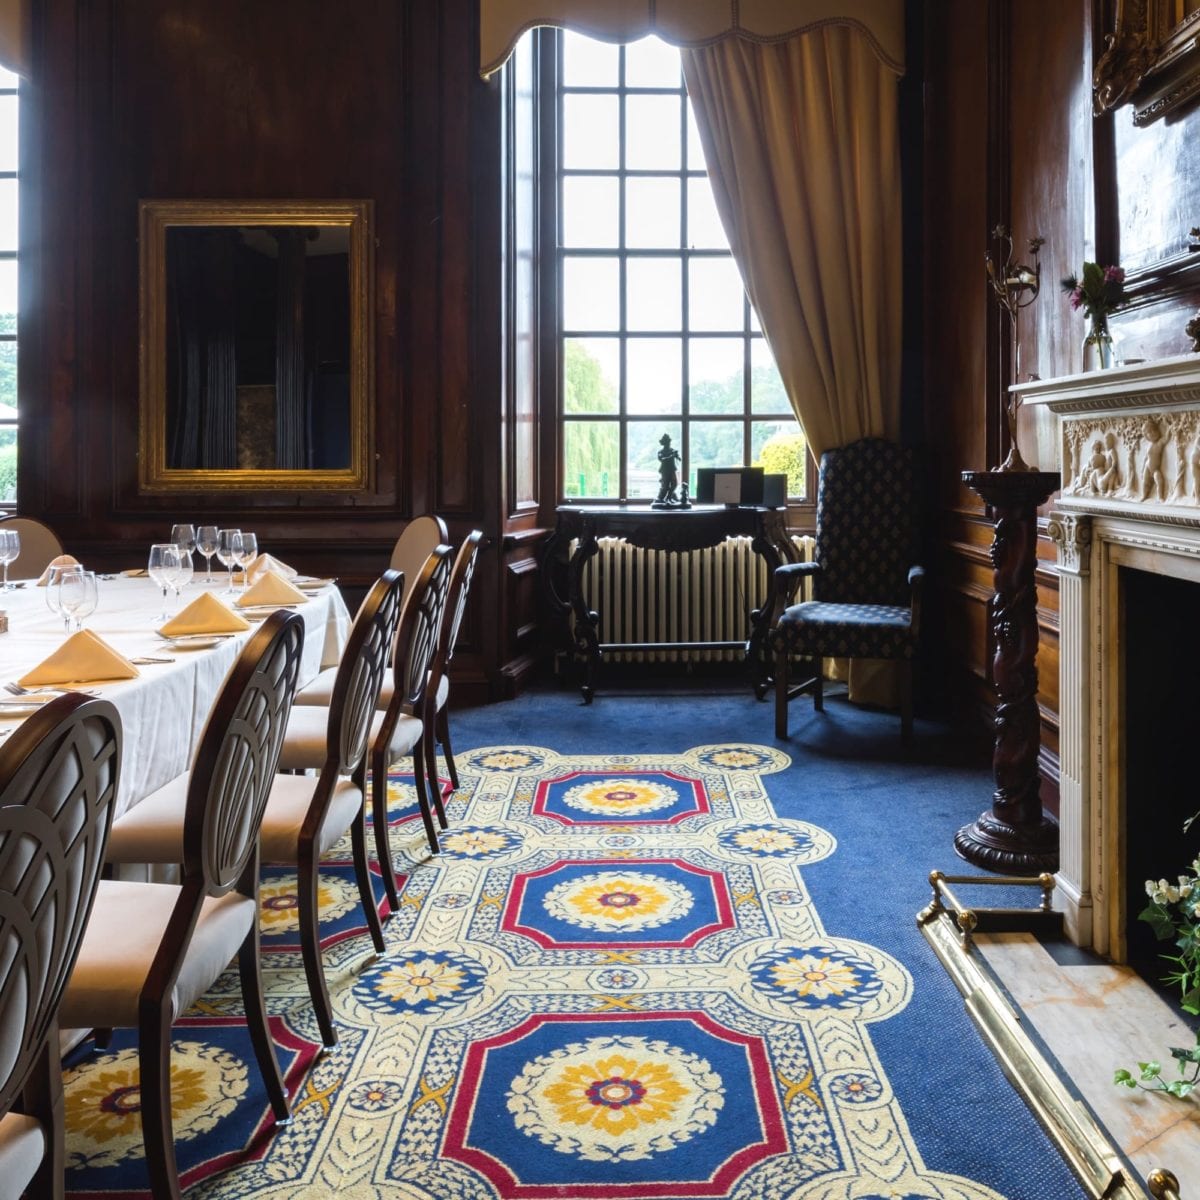 private dining Warwickshire at coombe abbey